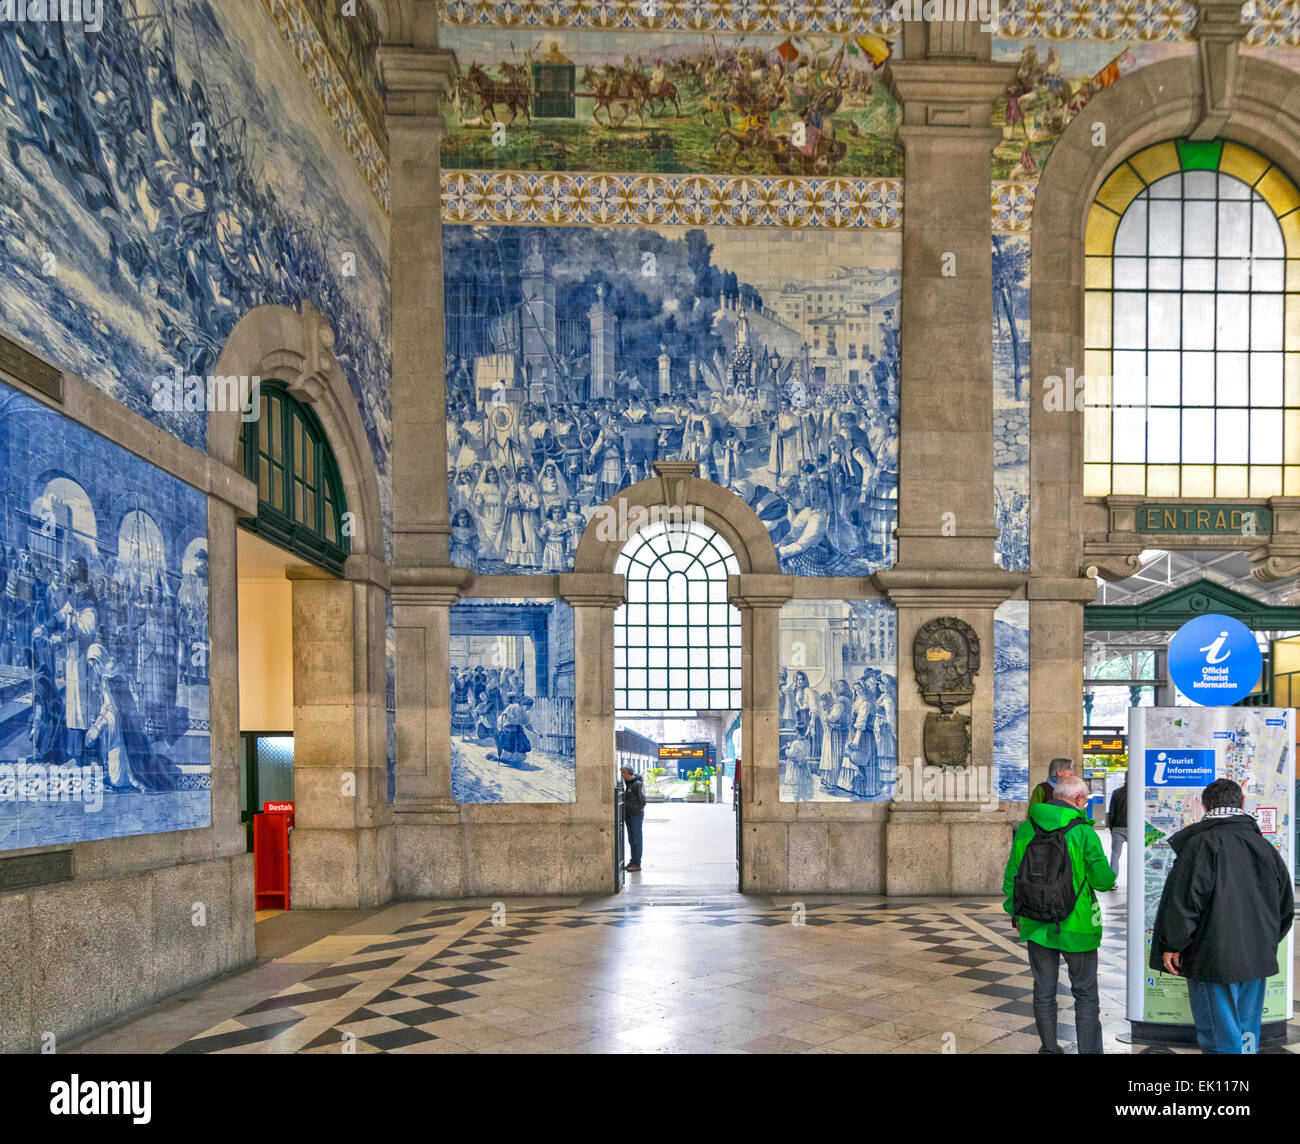 PORTUGAL PORTO THE TRAIN STATION SAO BENTO WITH BLUE AND COLOURED TILES  WITH HISTORICAL SCENES LOOKING TOWARDS CORNER SIDE WALL Stock Photo - Alamy